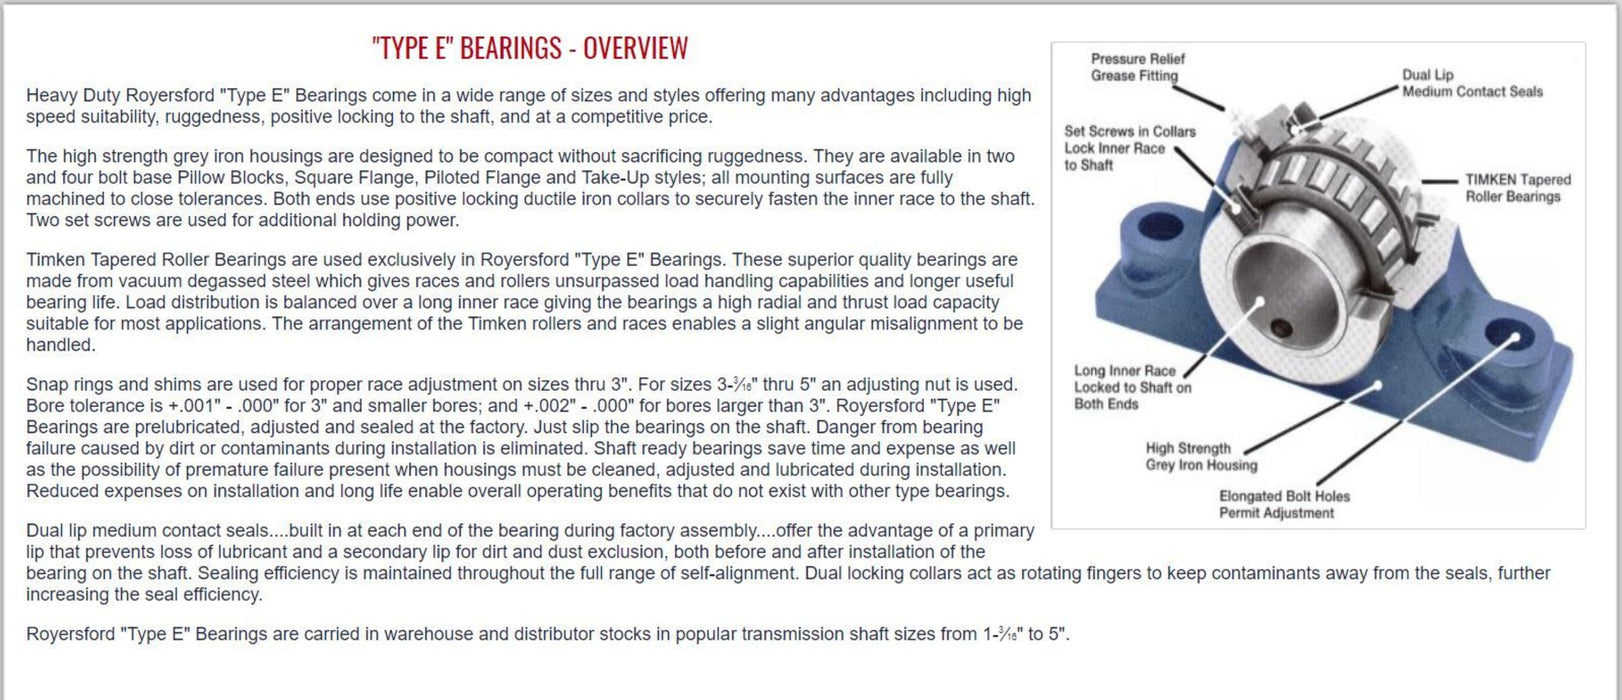 20-05-0408, Royersford Type E 4 Bolt Square Flange Bearing, 4-1/2" with Timken Tapered Roller Bearings